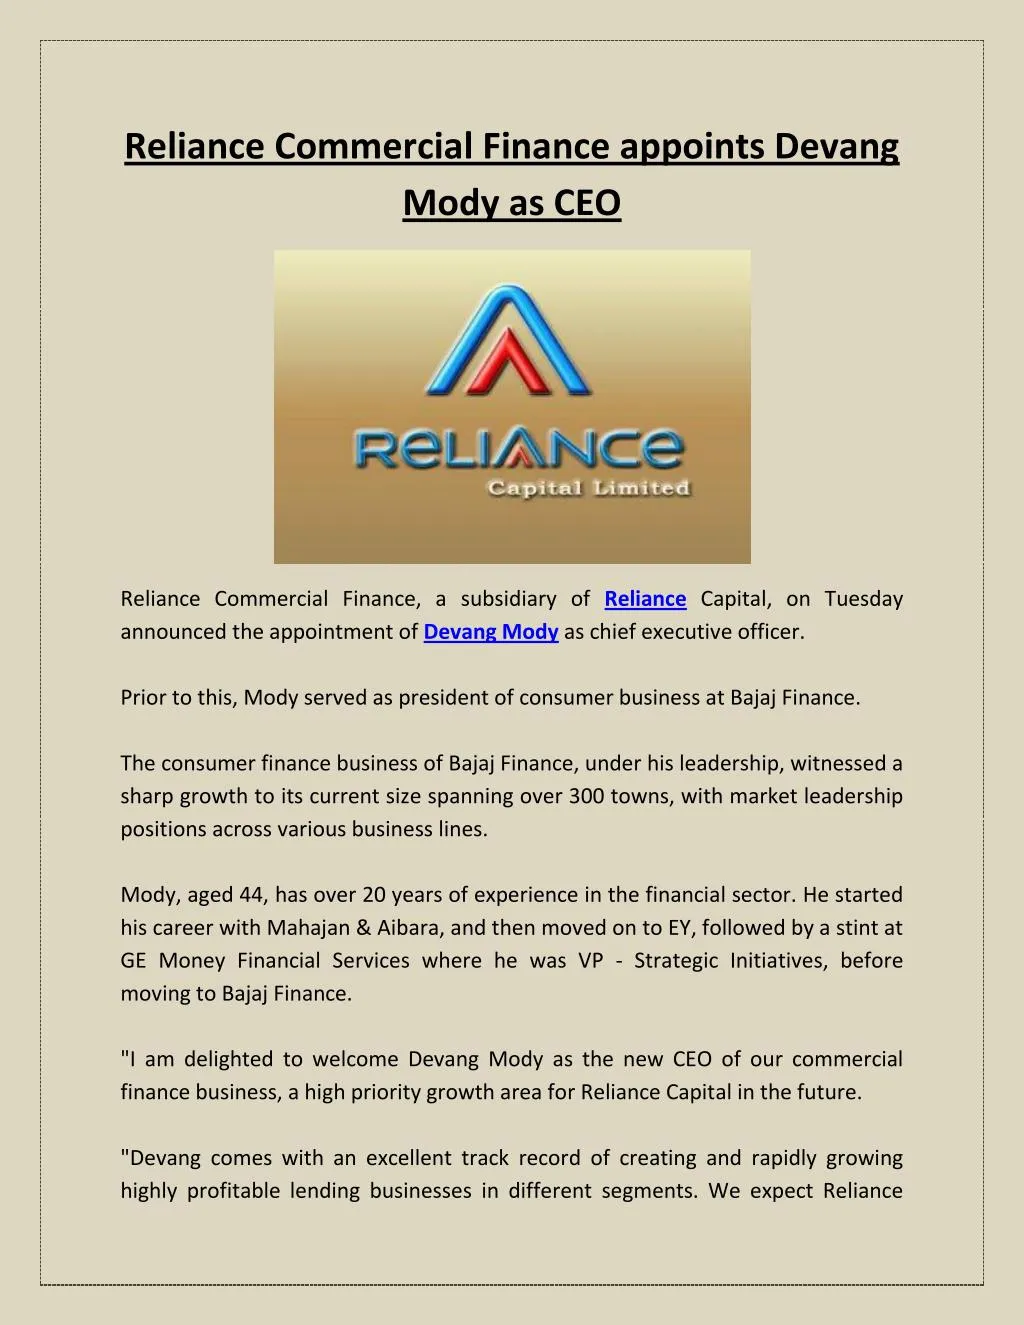 reliance commercial finance appoints devang mody